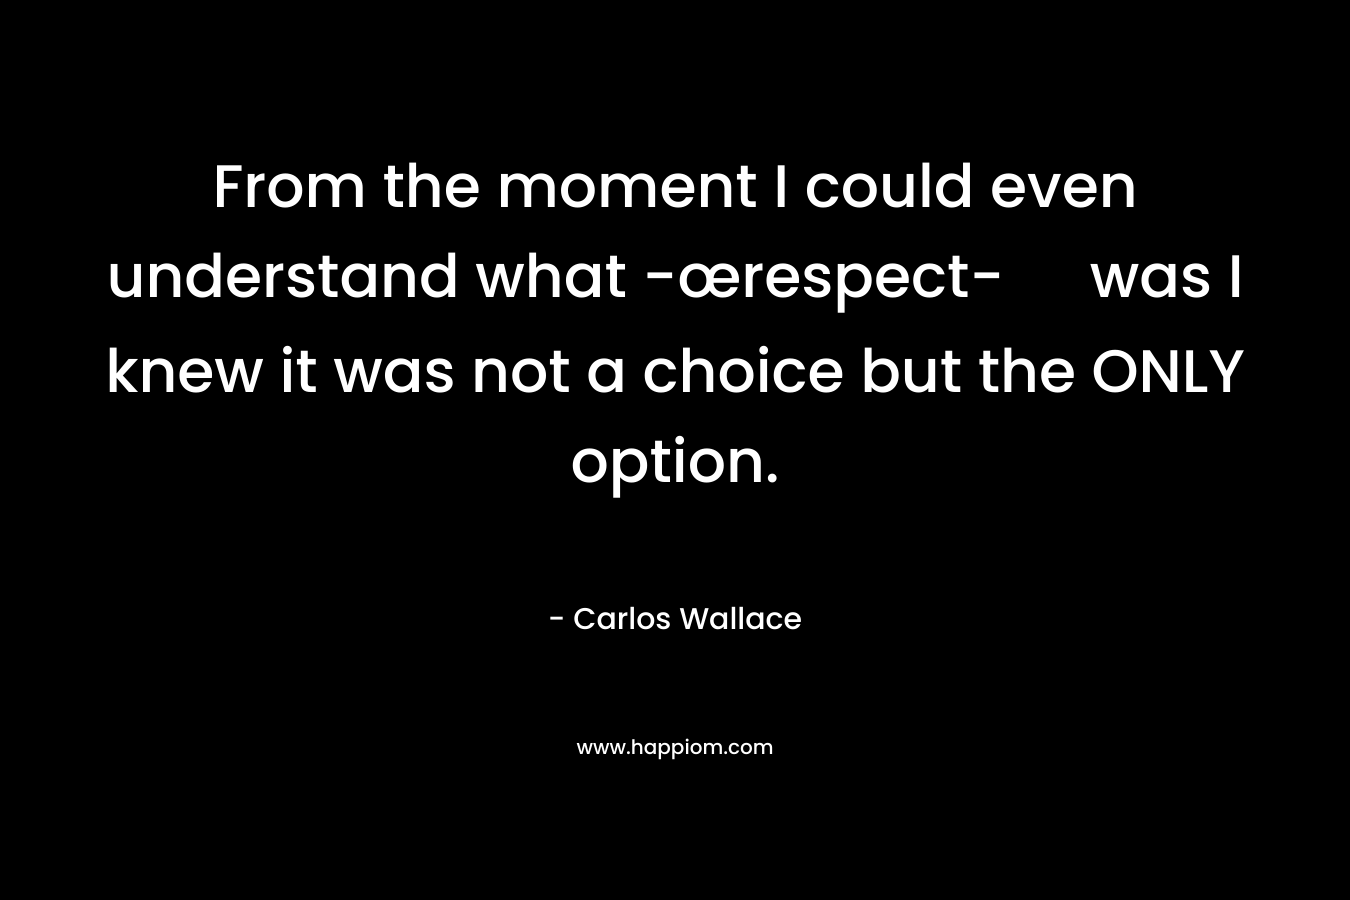 From the moment I could even understand what -œrespect- was I knew it was not a choice but the ONLY option. – Carlos Wallace